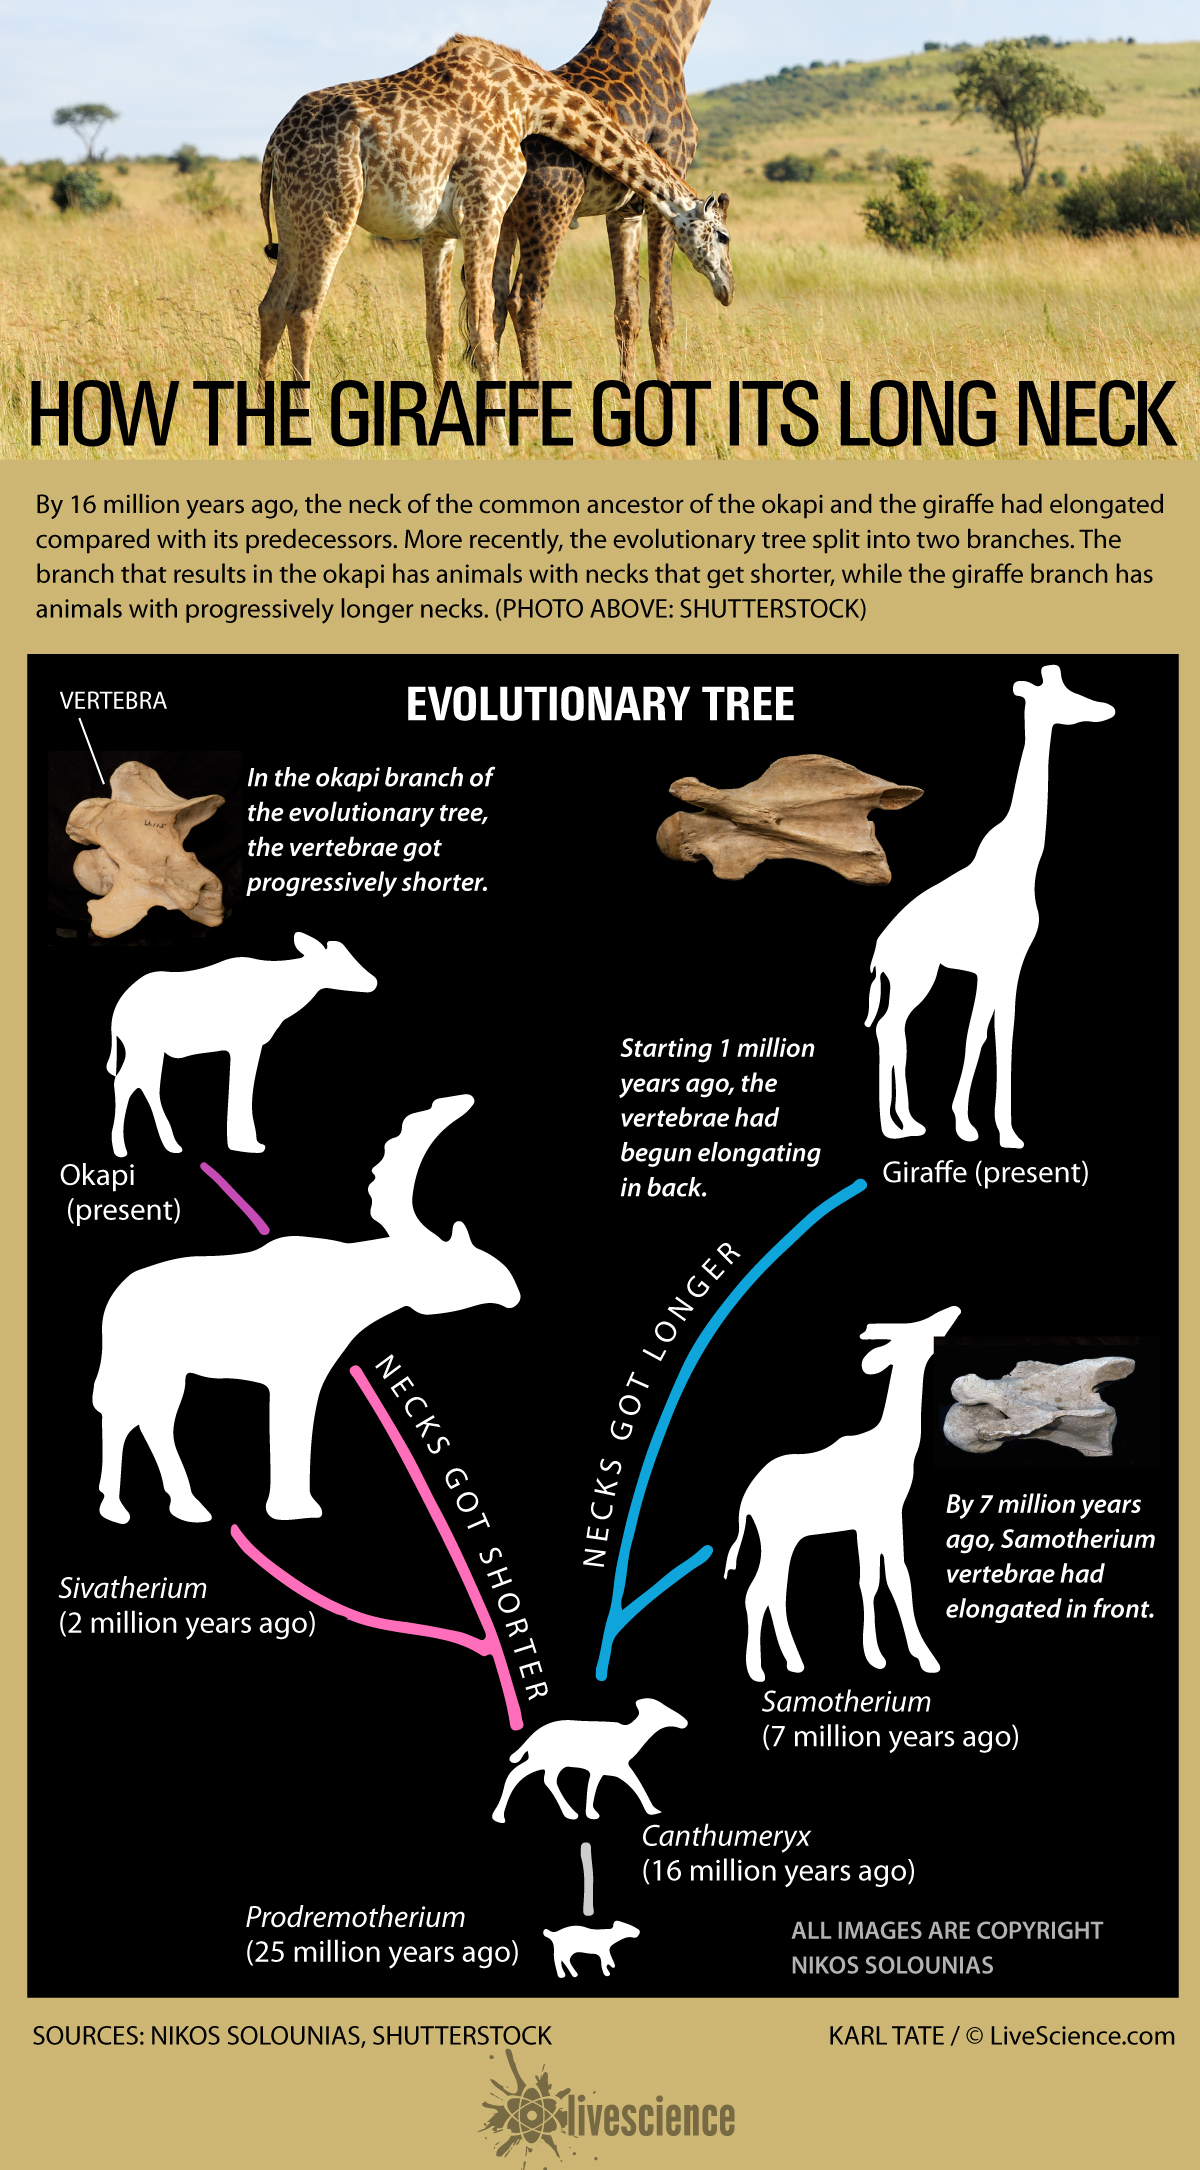 Here's How the Giraffe Got Its Long Neck (Infographic) | Live Science